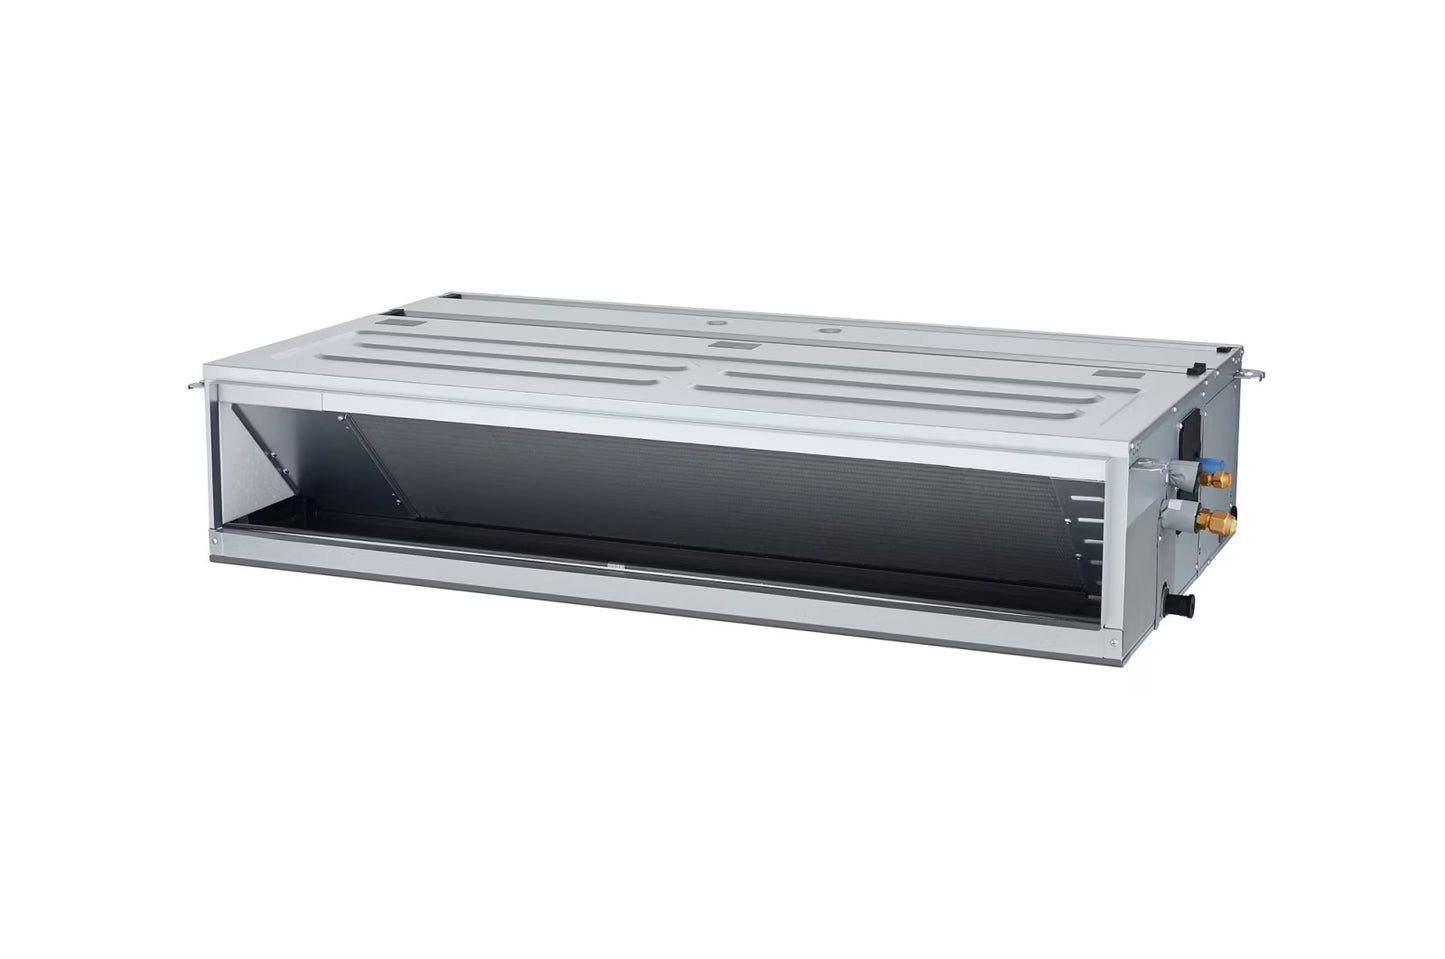 LG Ceiling Concealed Duct INV Unit 8.2KW with High Static and E.S.P. Control for Multiple Rooms - ARNU28GBGA2